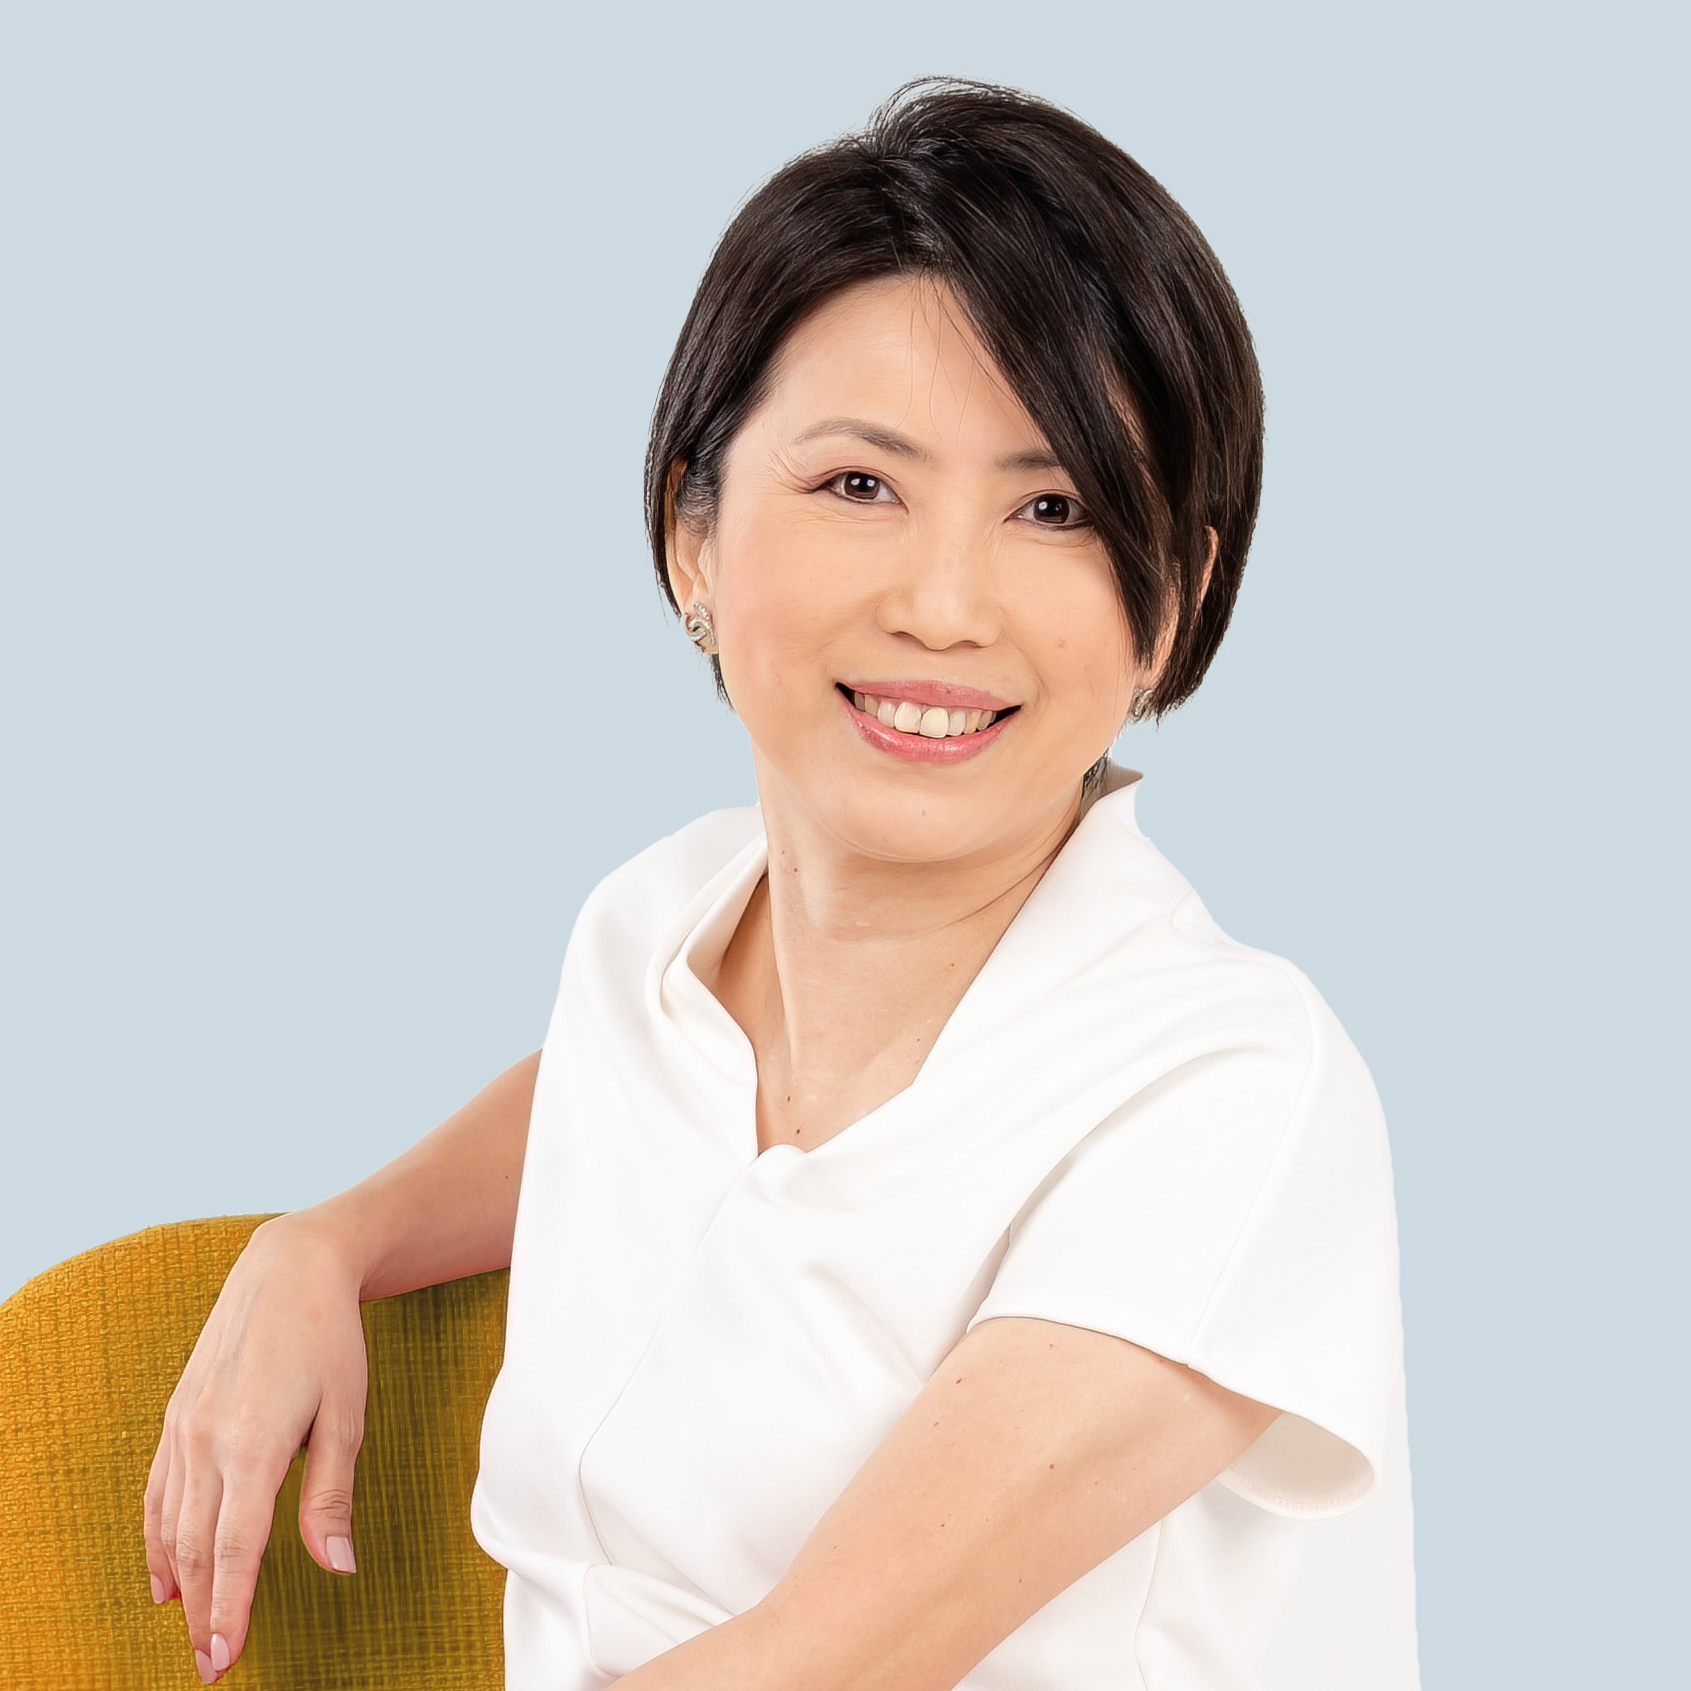 Peggy Cheng our Senior Business Development Manager